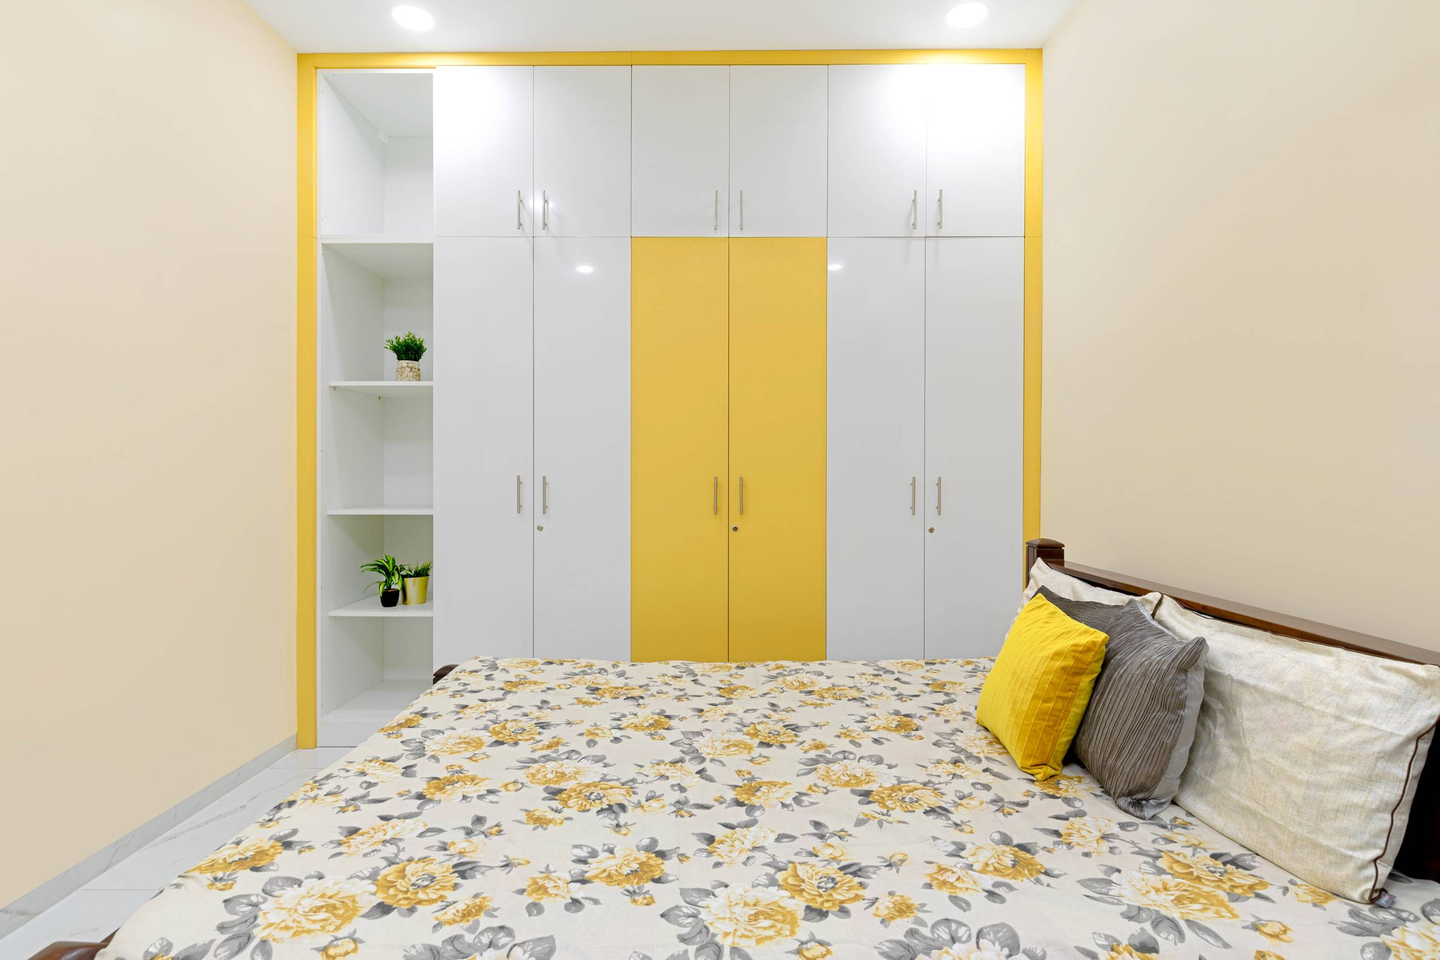 Kids' Room With White And Yellow Bedding And Wardrobe Design - Livspace